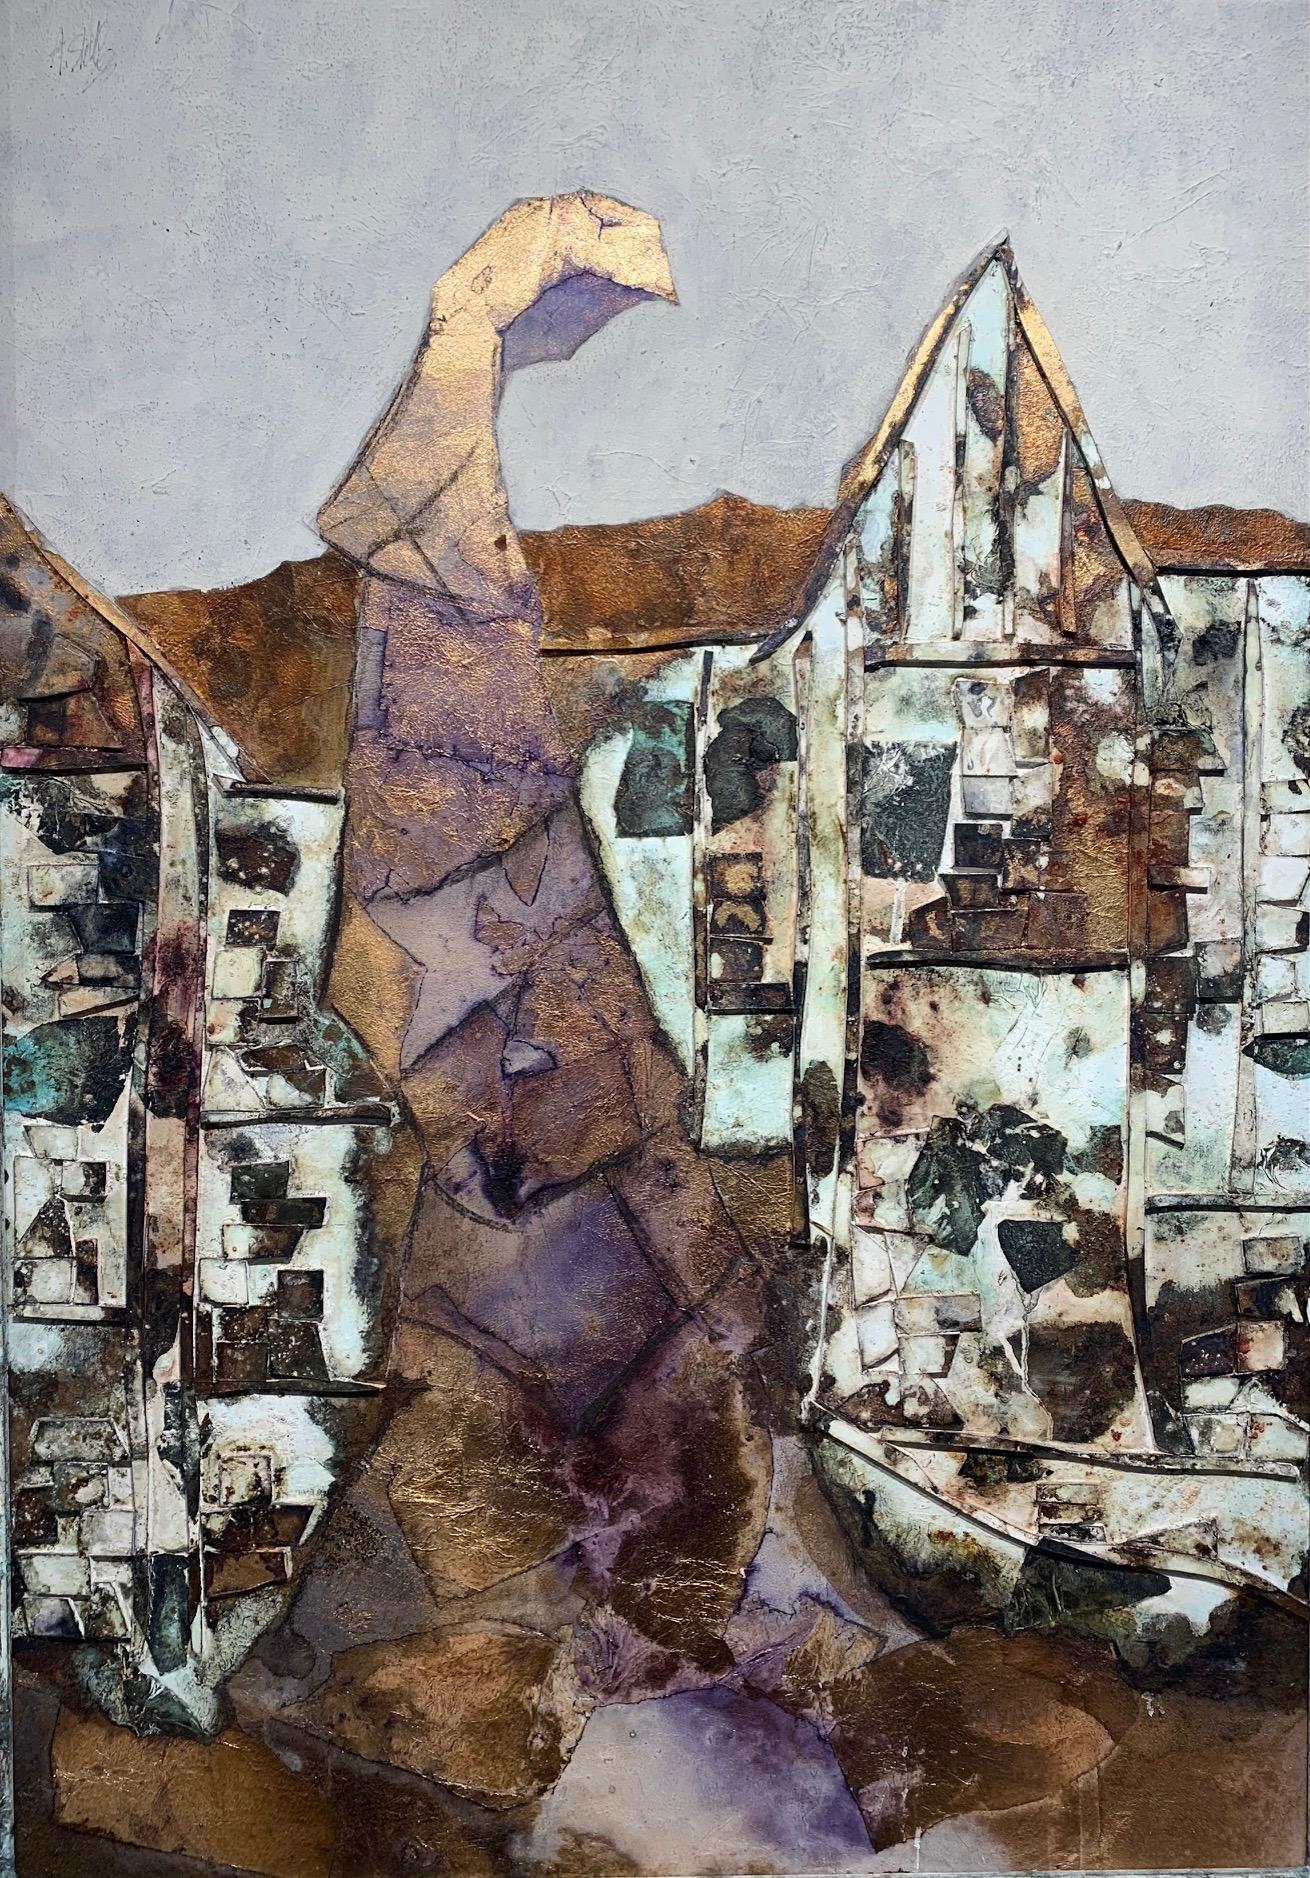 Woman of The Village -Andrea Stella-Figurative Abstract Painting-Mixed Media - Mixed Media Art by ANDREA STELLA